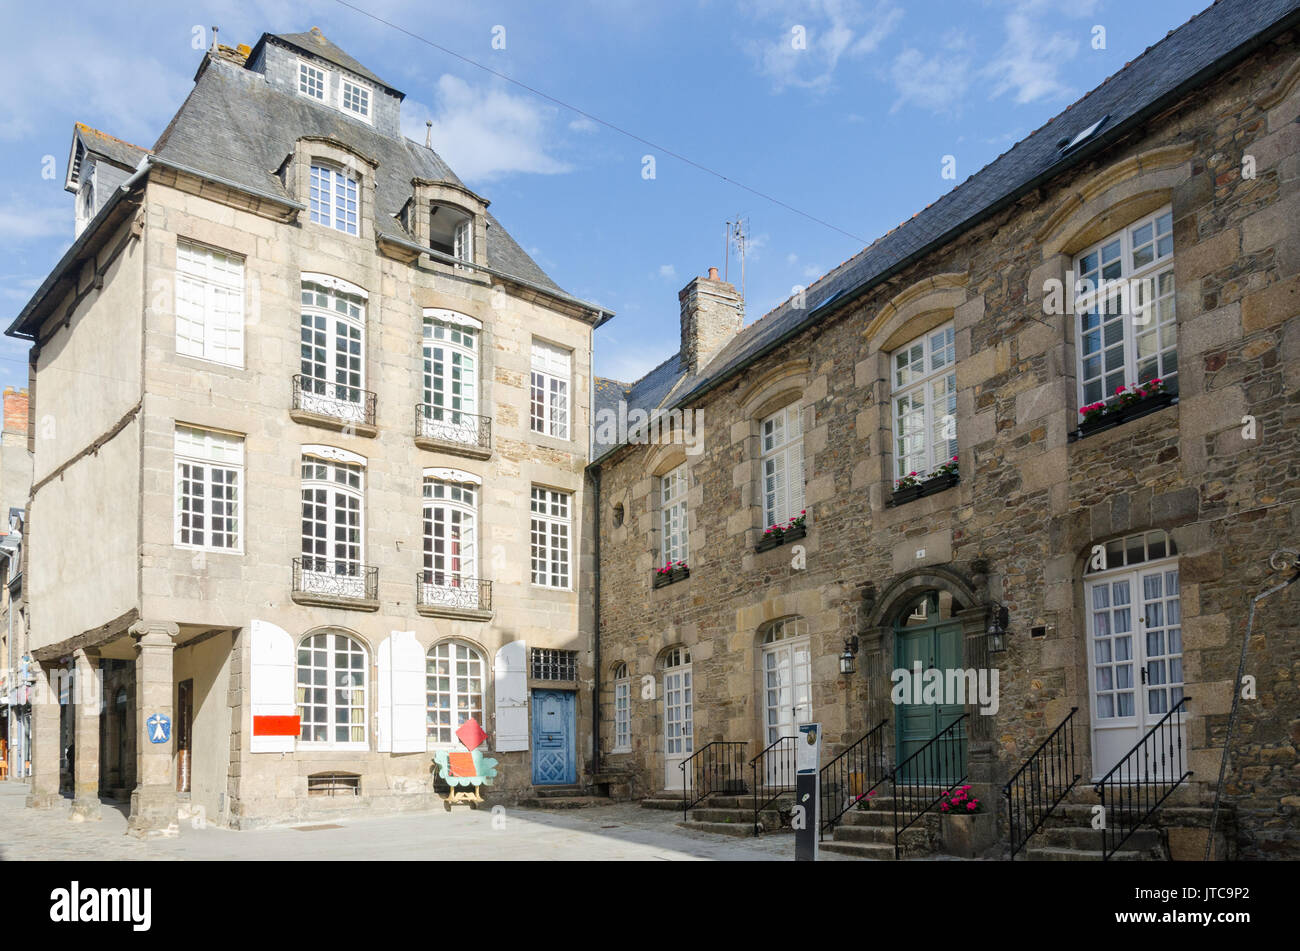 Smart stone houses in the medieval french town of Dinan in Brittany, North West France Stock Photo